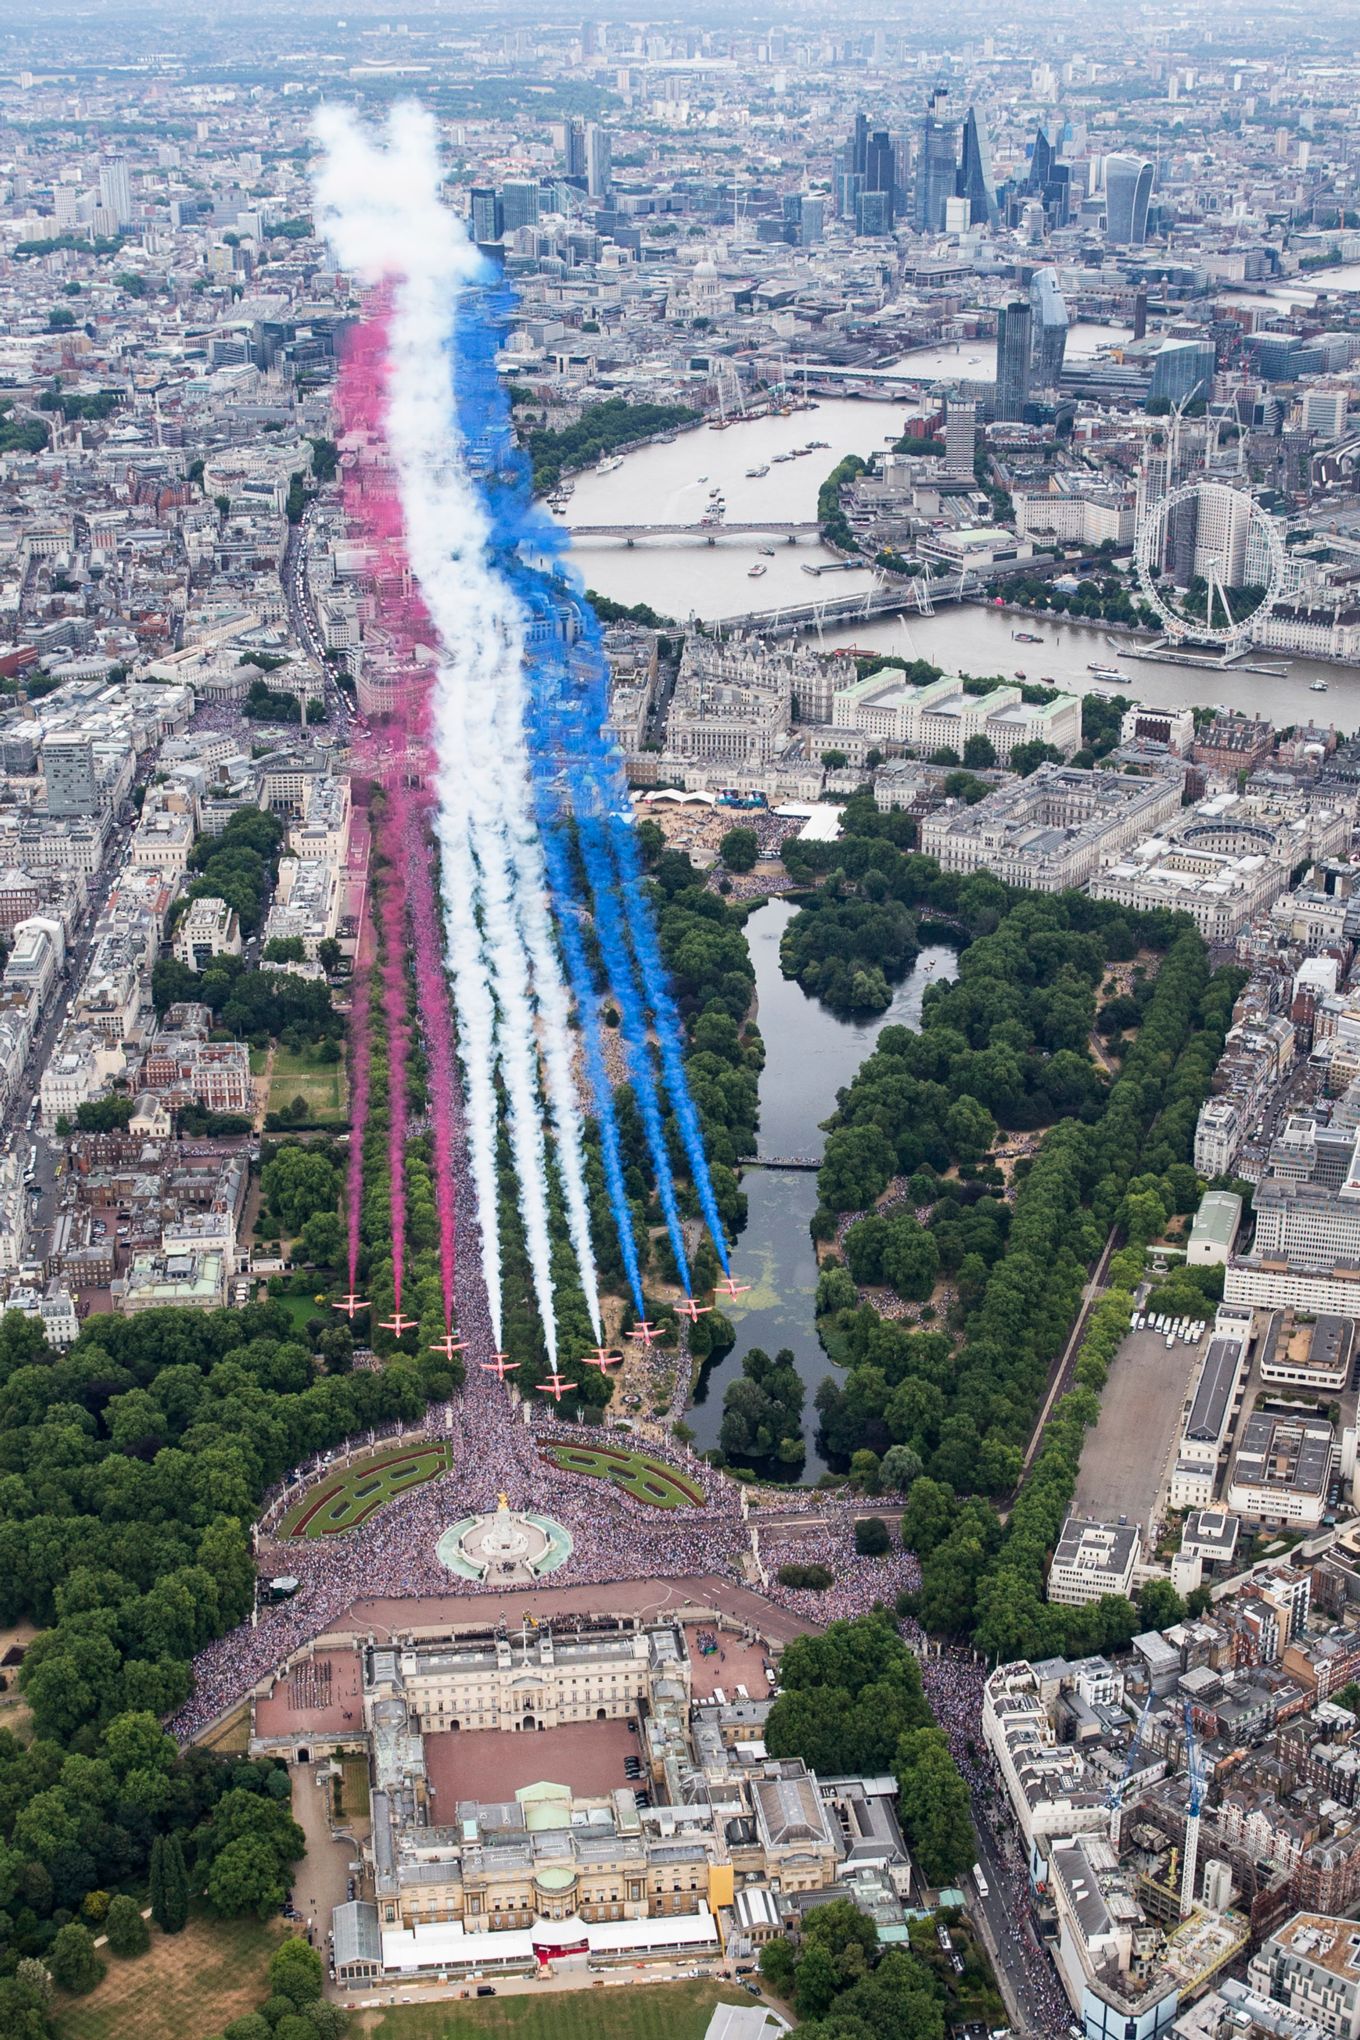 The Red Arrows fly over Buckingham Palace in formation with red, white and blue smoke plumes trailing behind.